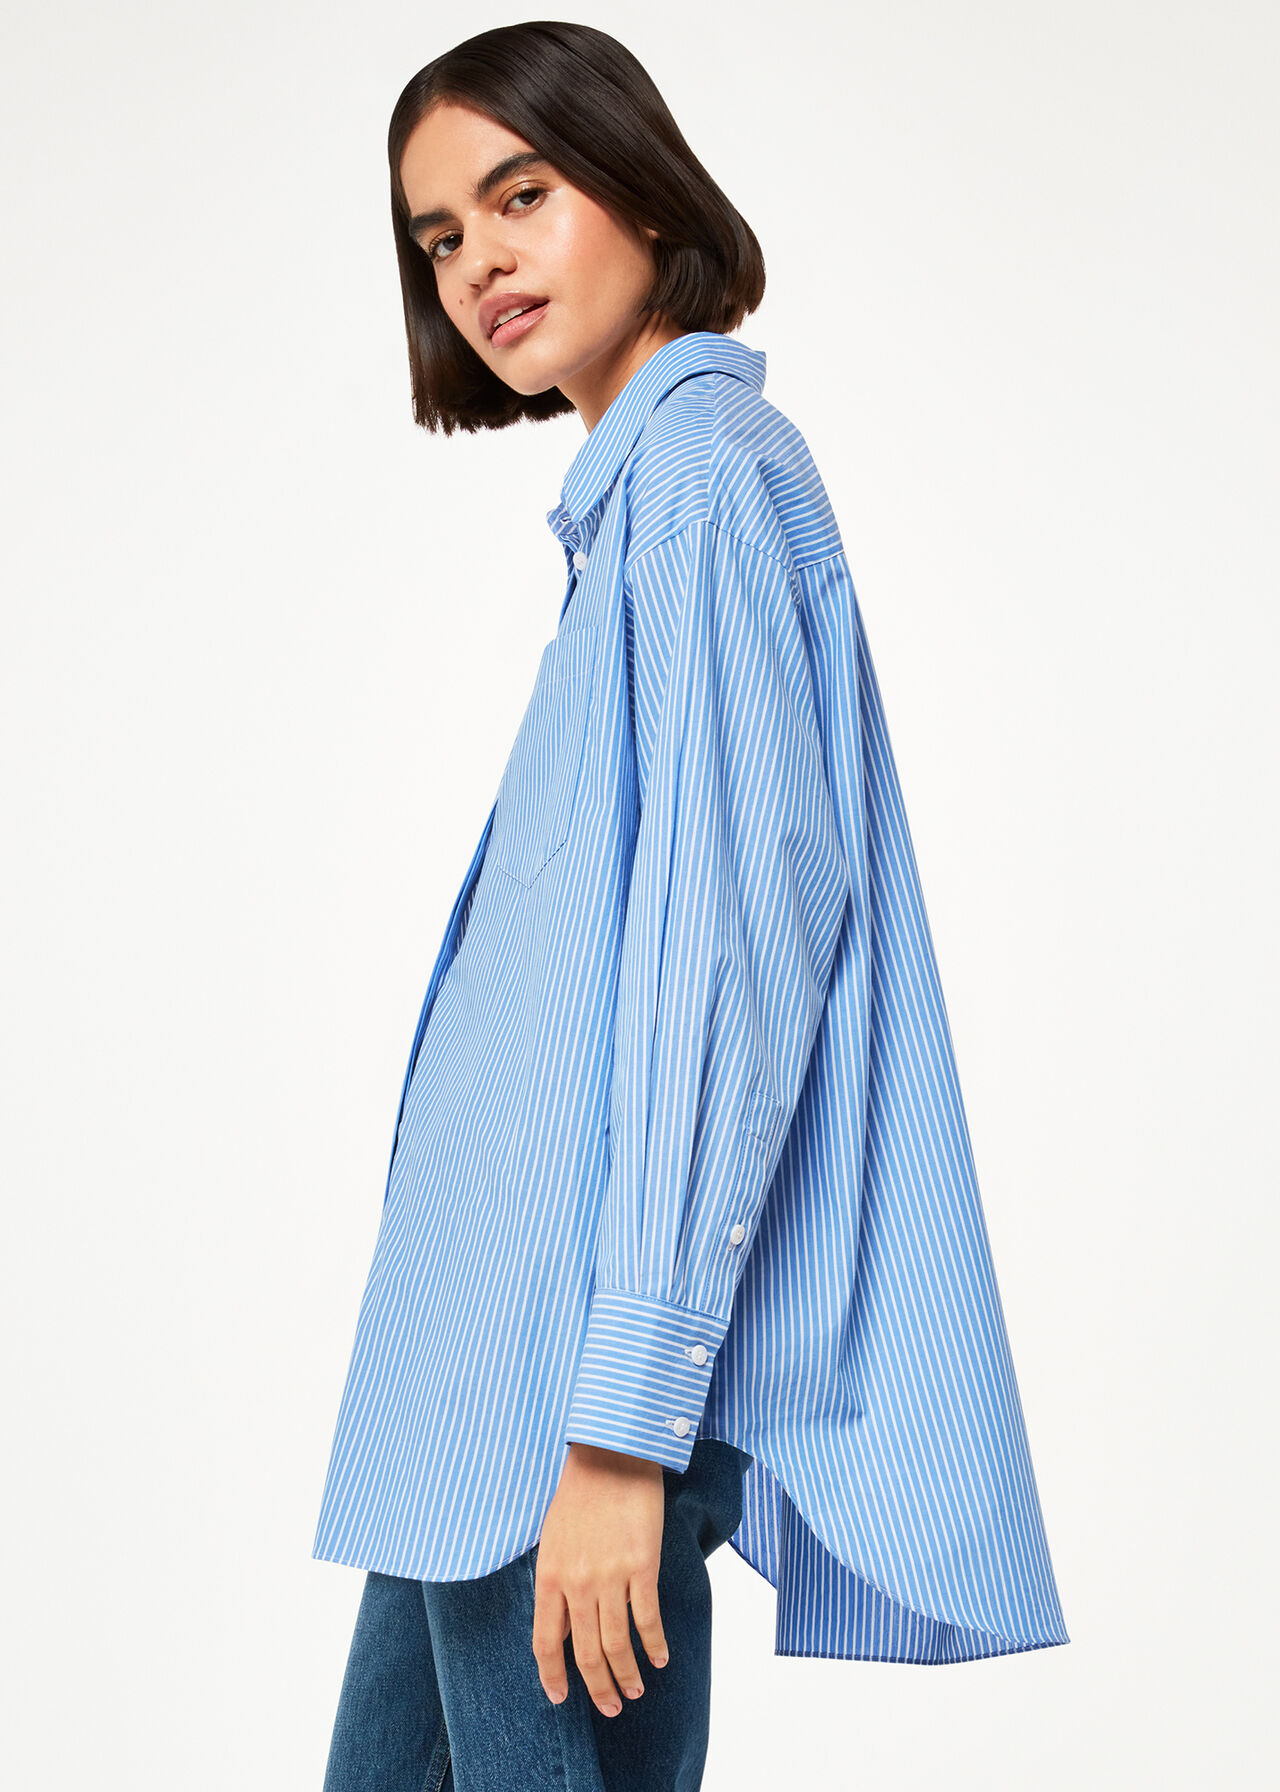 Blue & White Oversized Striped Shirt | Shop Now at Whistles |